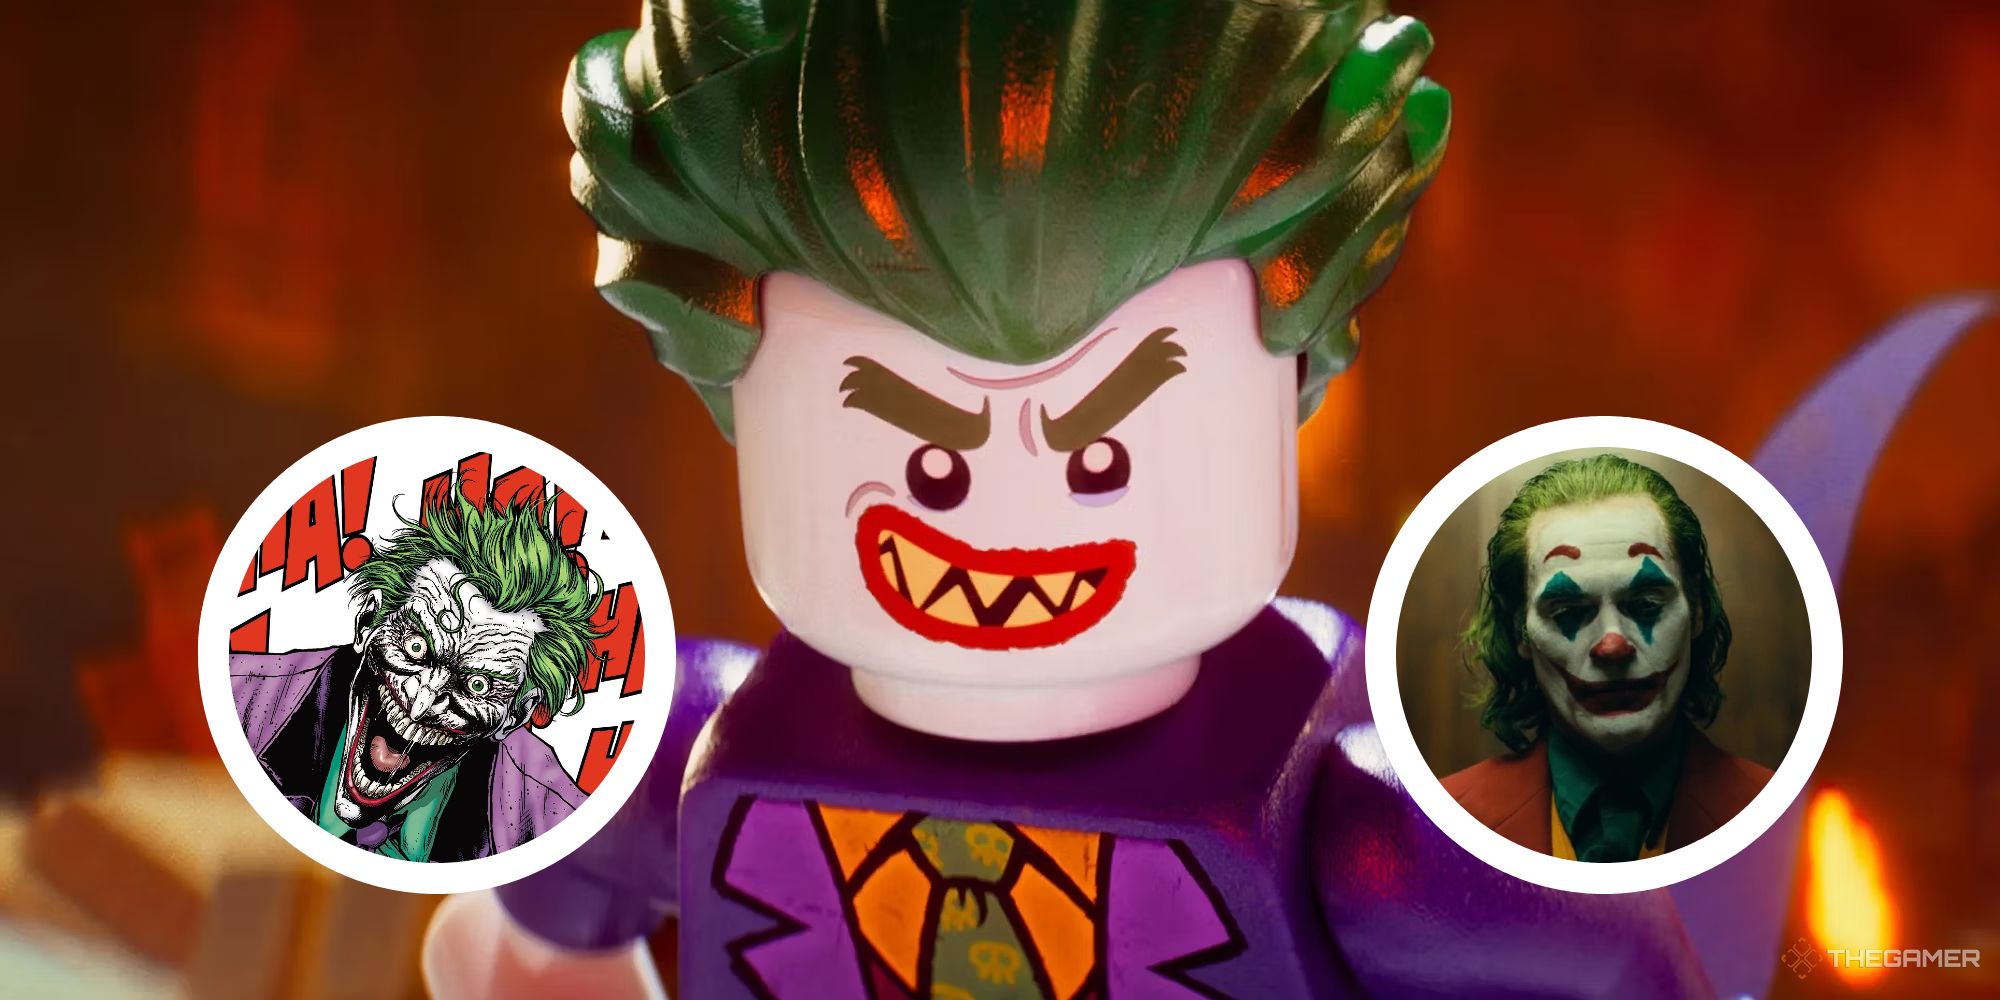 lego joker with circles containing two other joker types